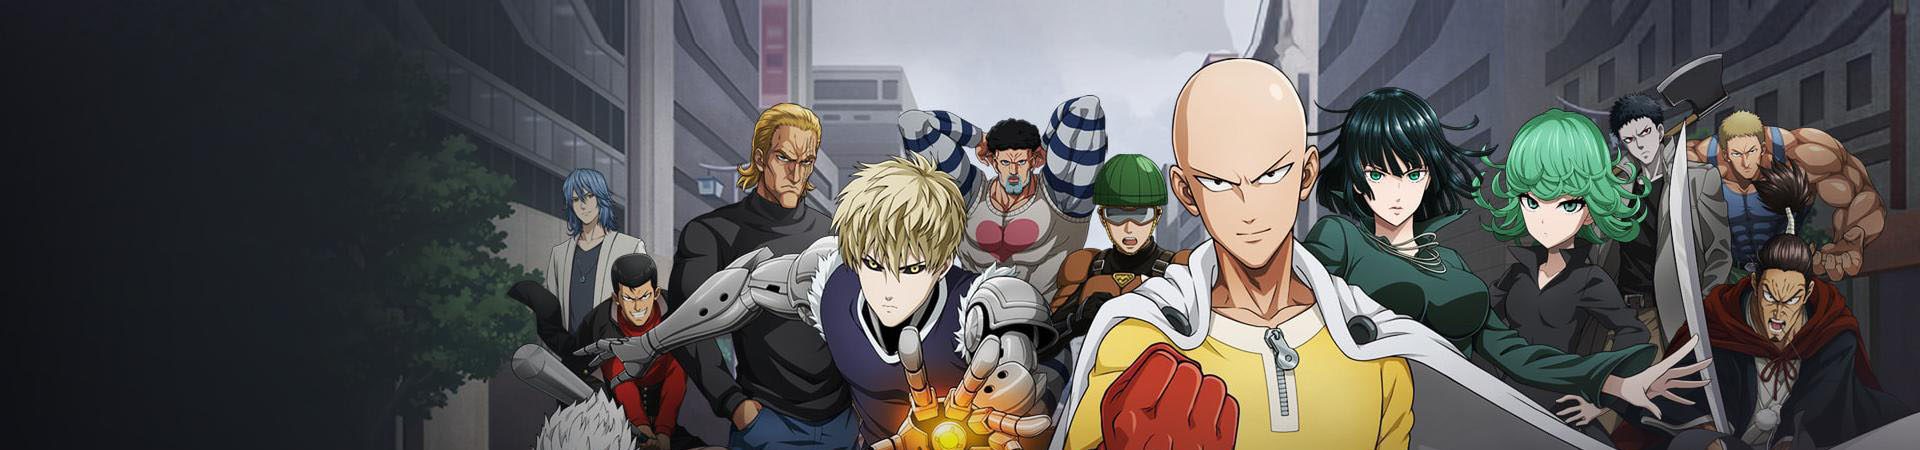 One Punch Man: Road to Hero 2.0 banner